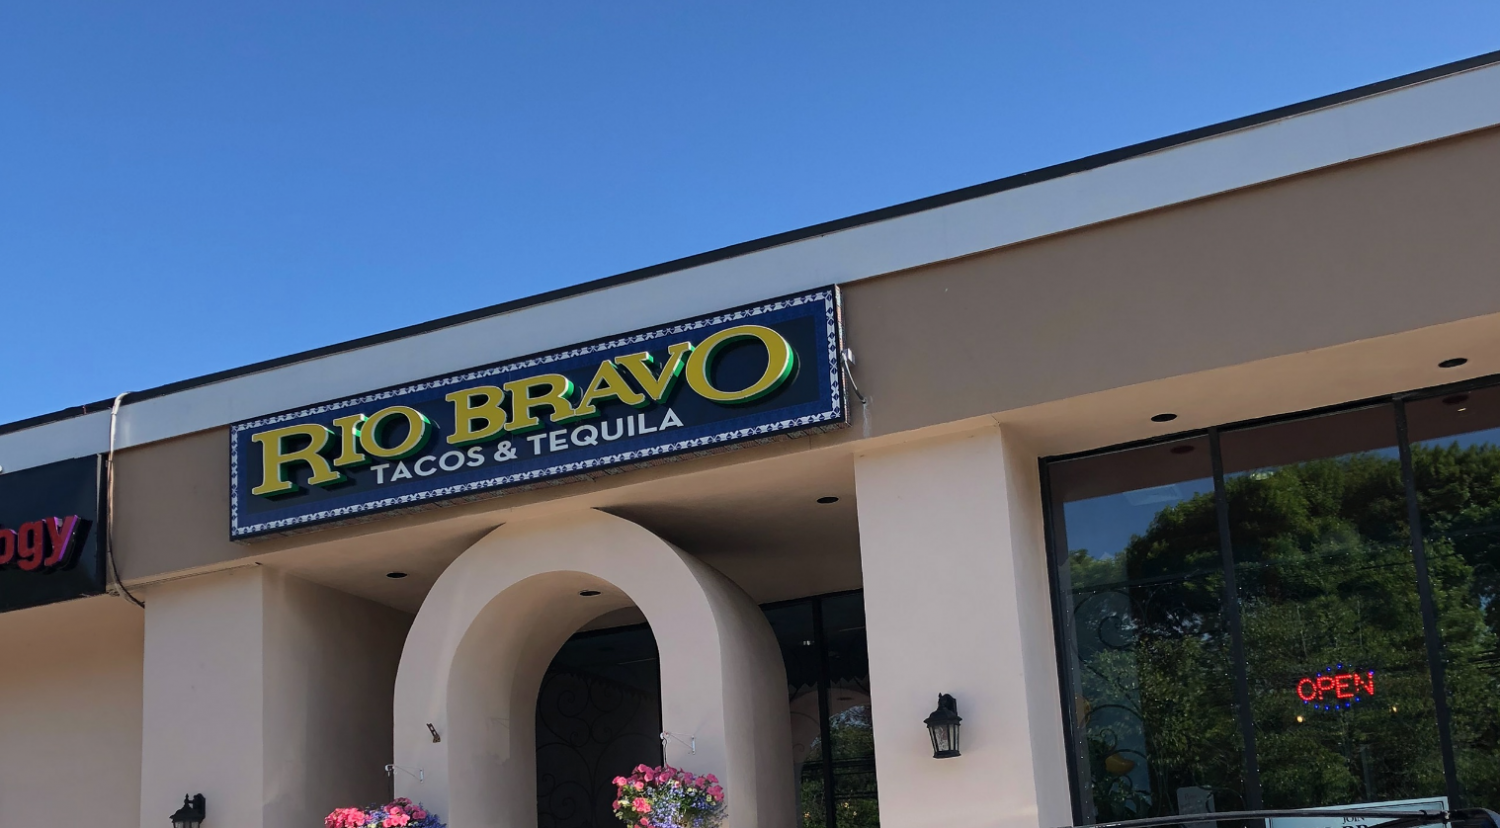 Rio Bravo demonstrates authentic Mexican food